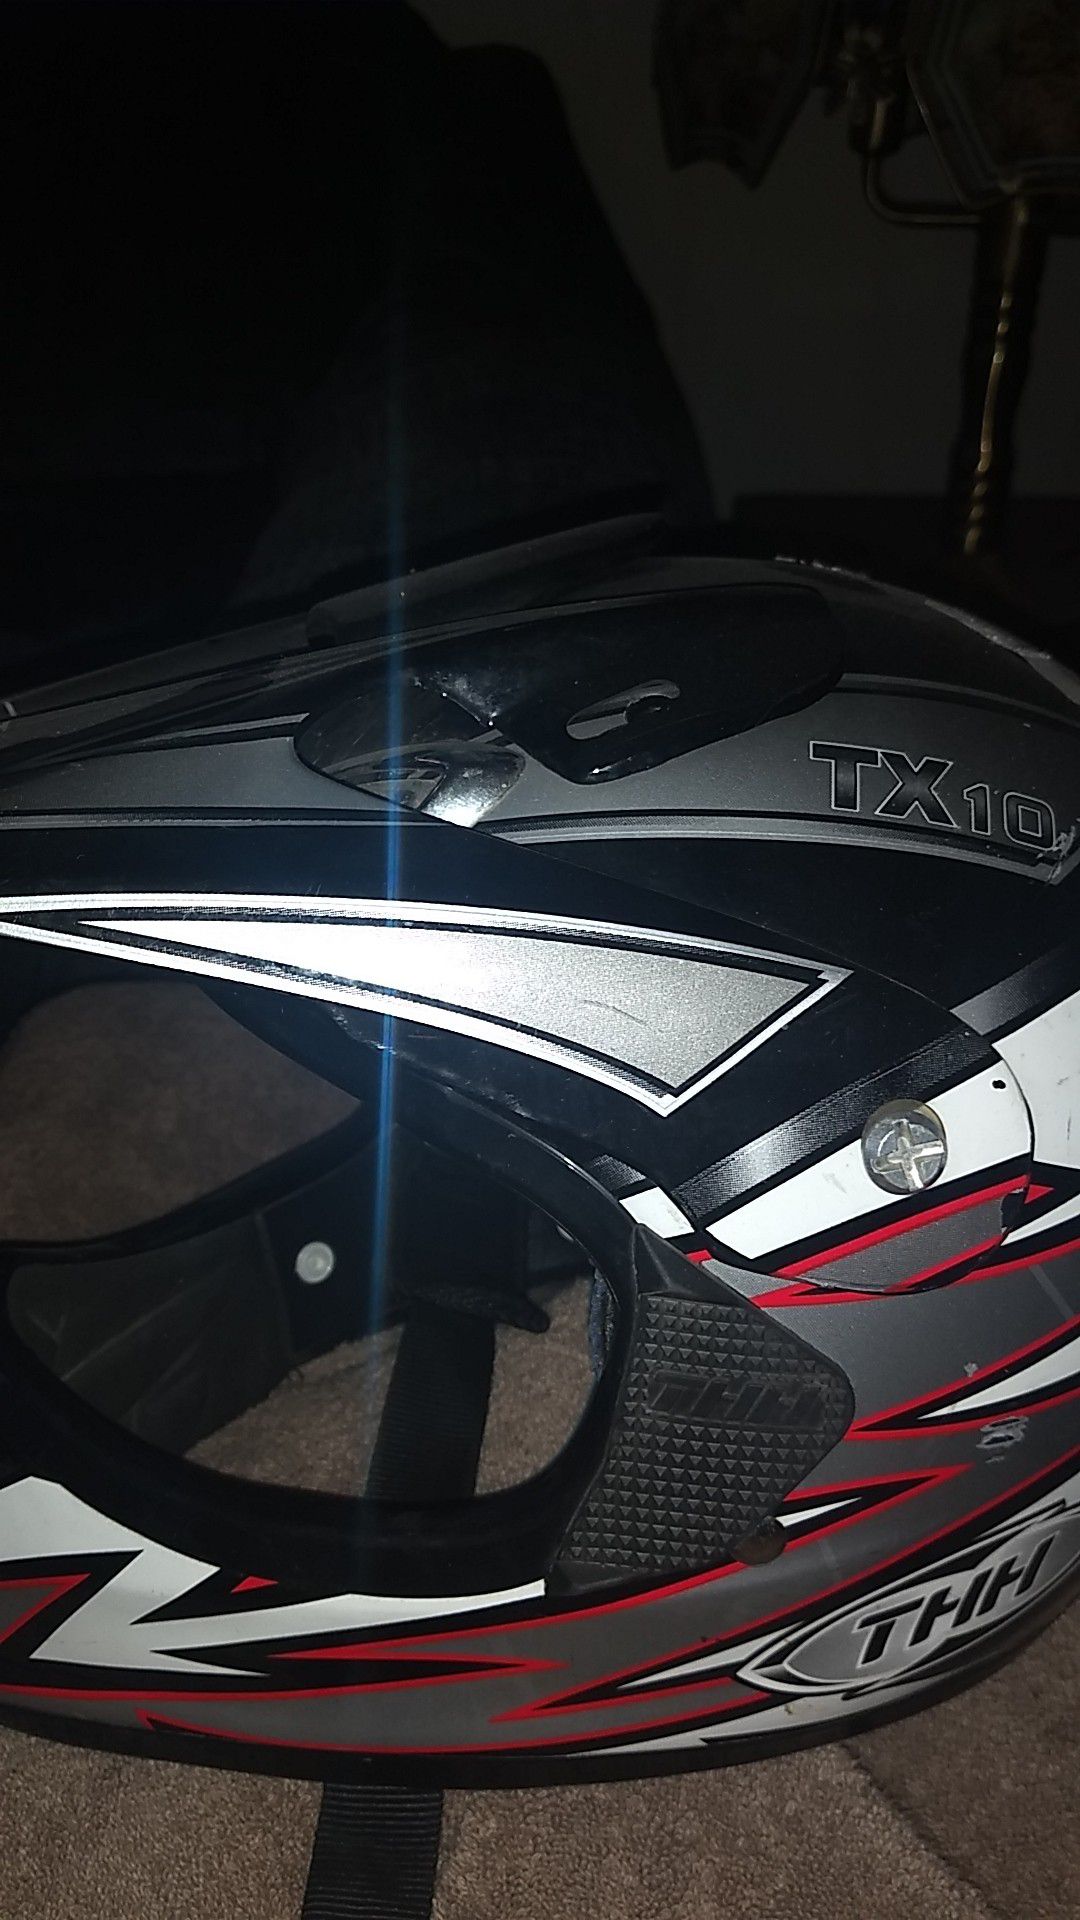 Thh tx10 youth large helmet free to anybody